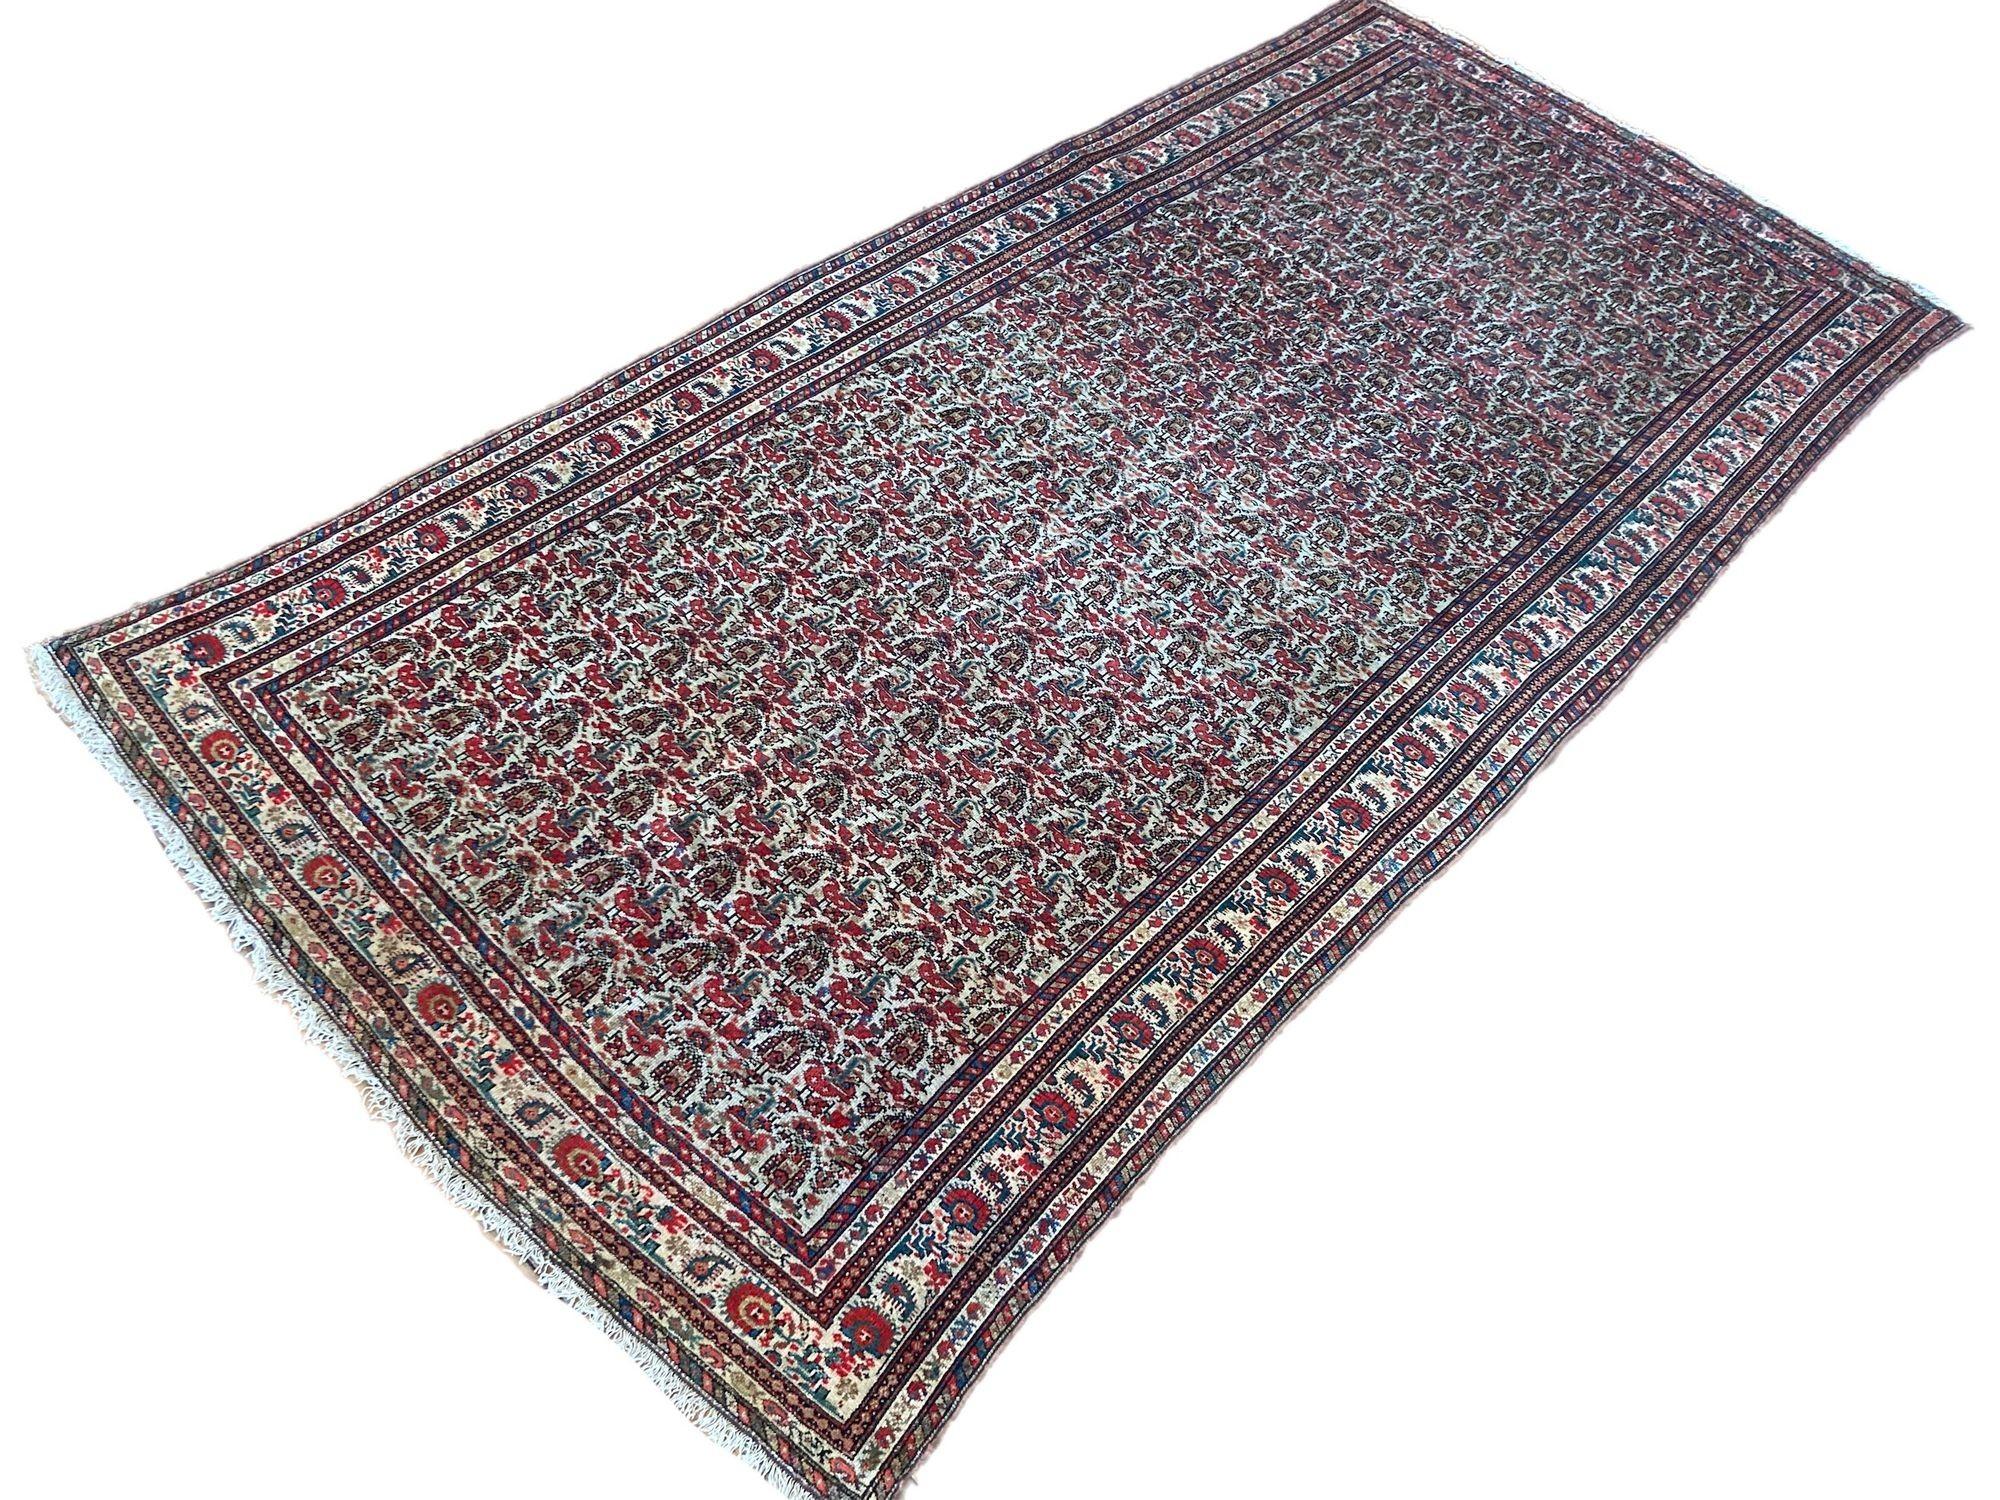 Antique Malayer Runner 2.86m X 1.38m In Good Condition For Sale In St. Albans, GB